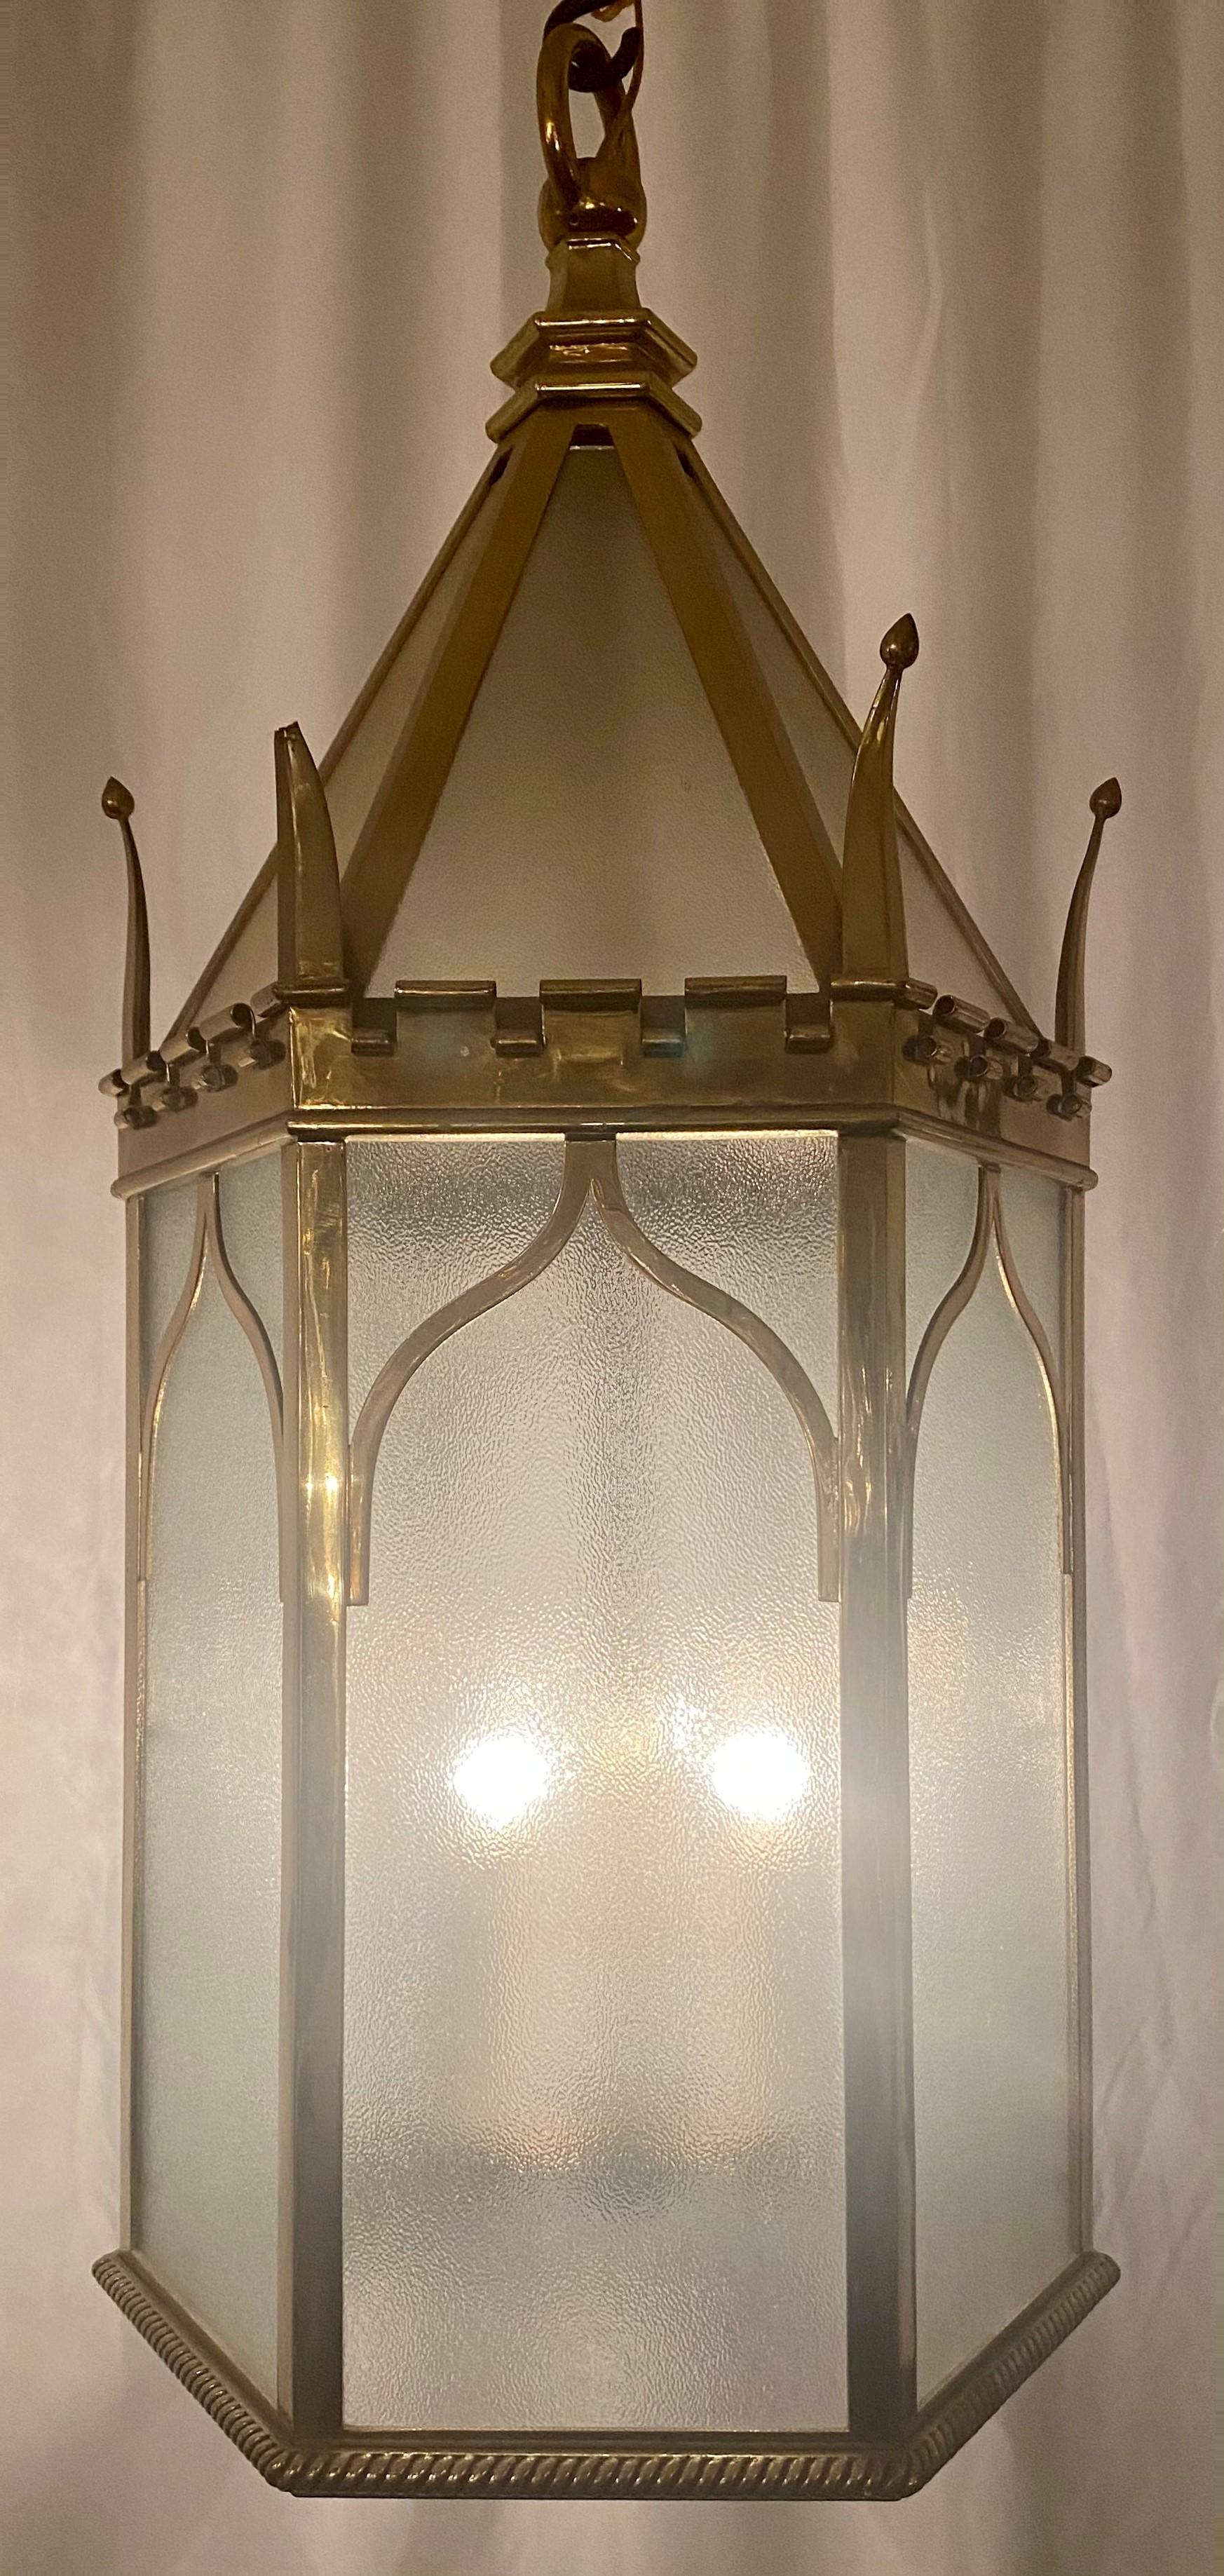 Antique late 19th century English brass and frosted glass lantern, circa 1890-1900
LAN026.